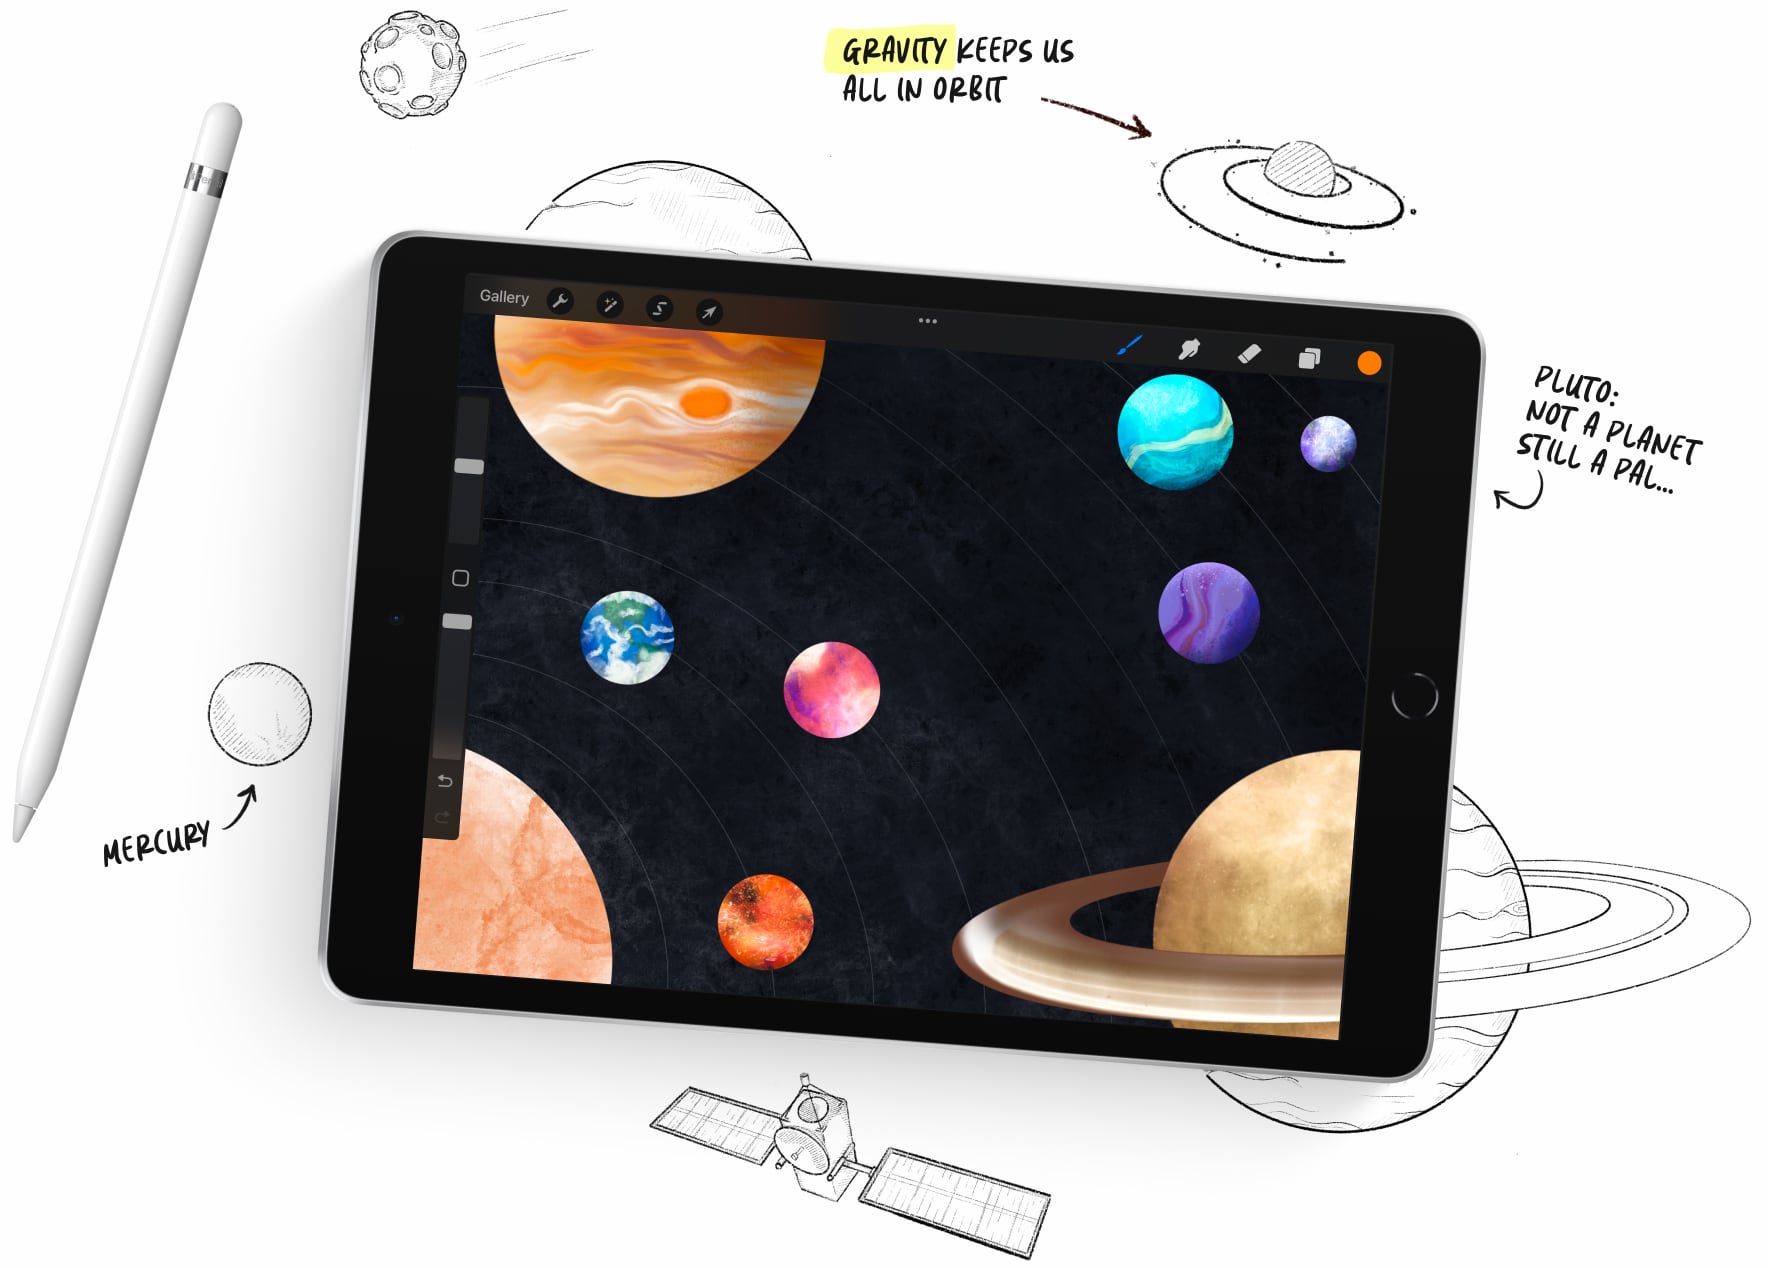 Diagram featuring an iPad and apple Pencil using the Procreate app. A colorful illusration of the Solar System is shown within the iPad, and some sketched element explode outwards filling the space outside of the iPad.